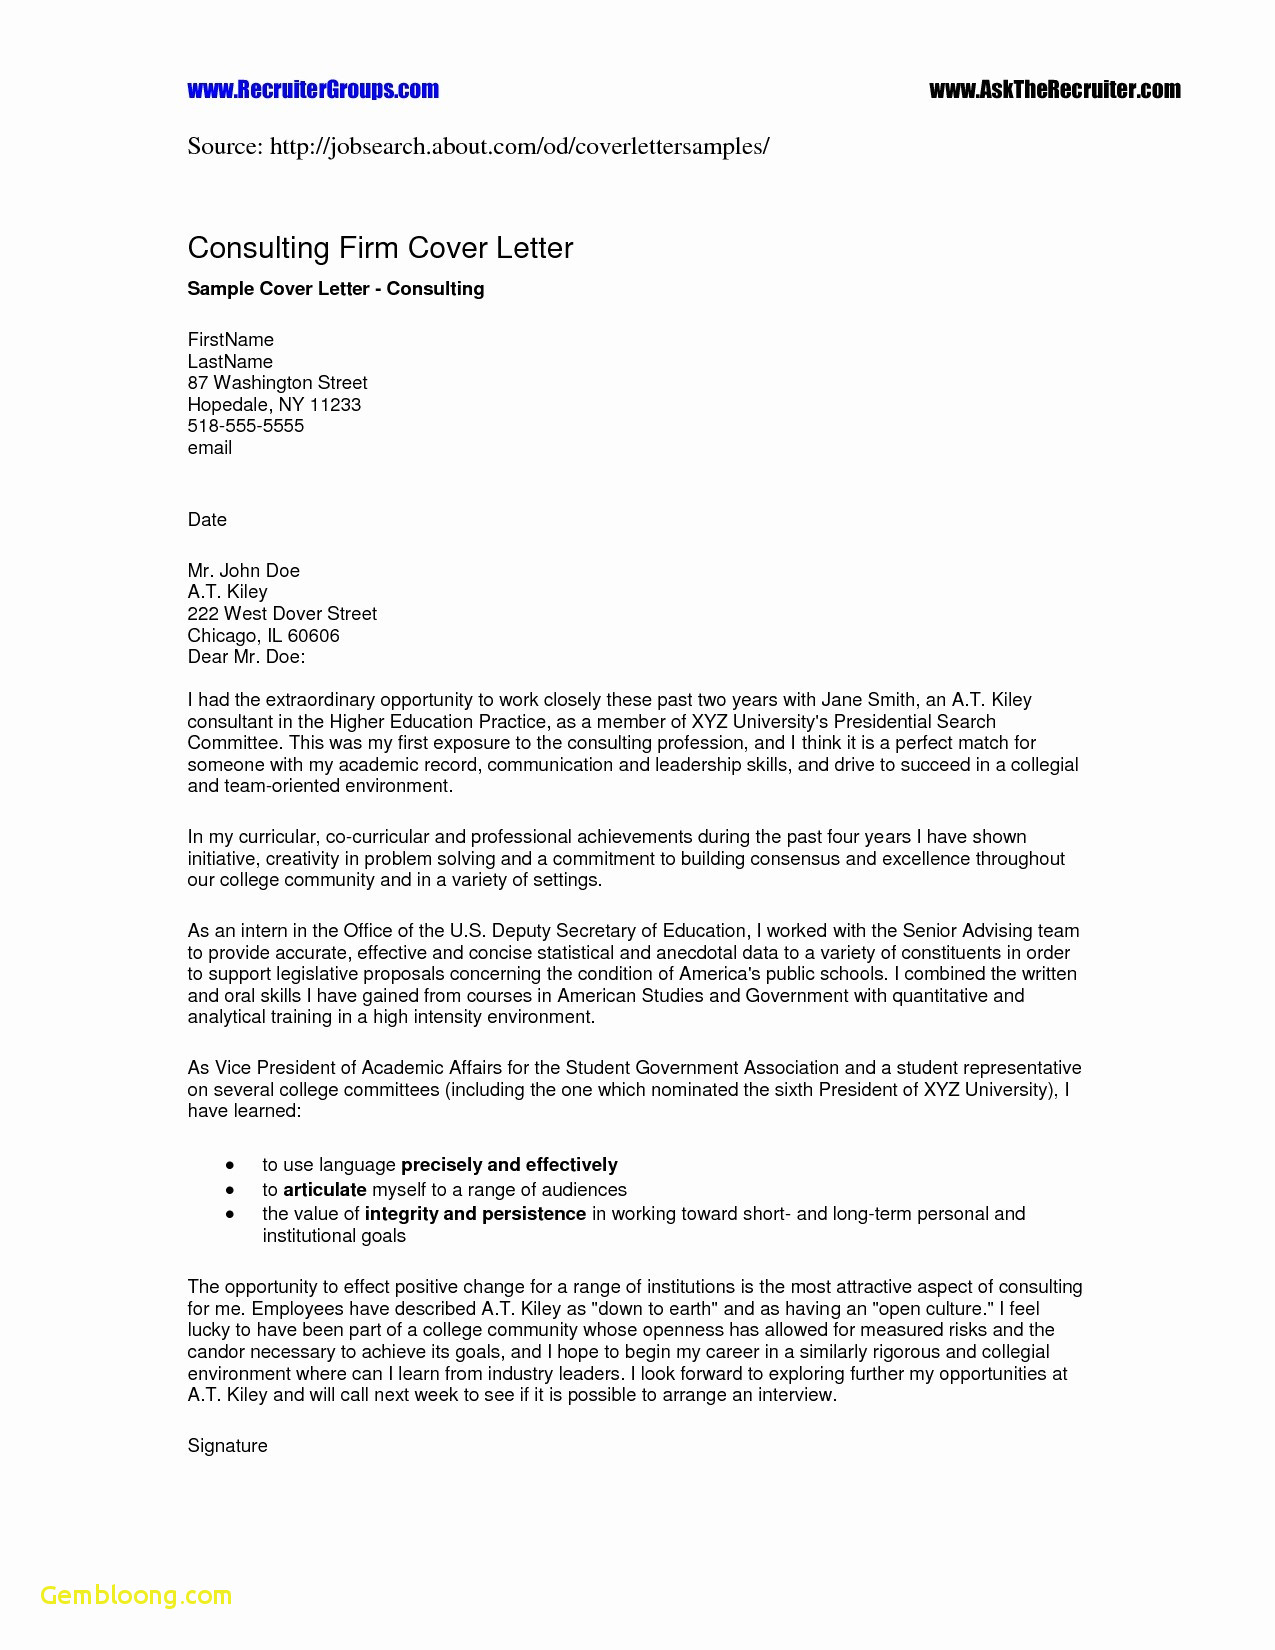 cover letter template latex download